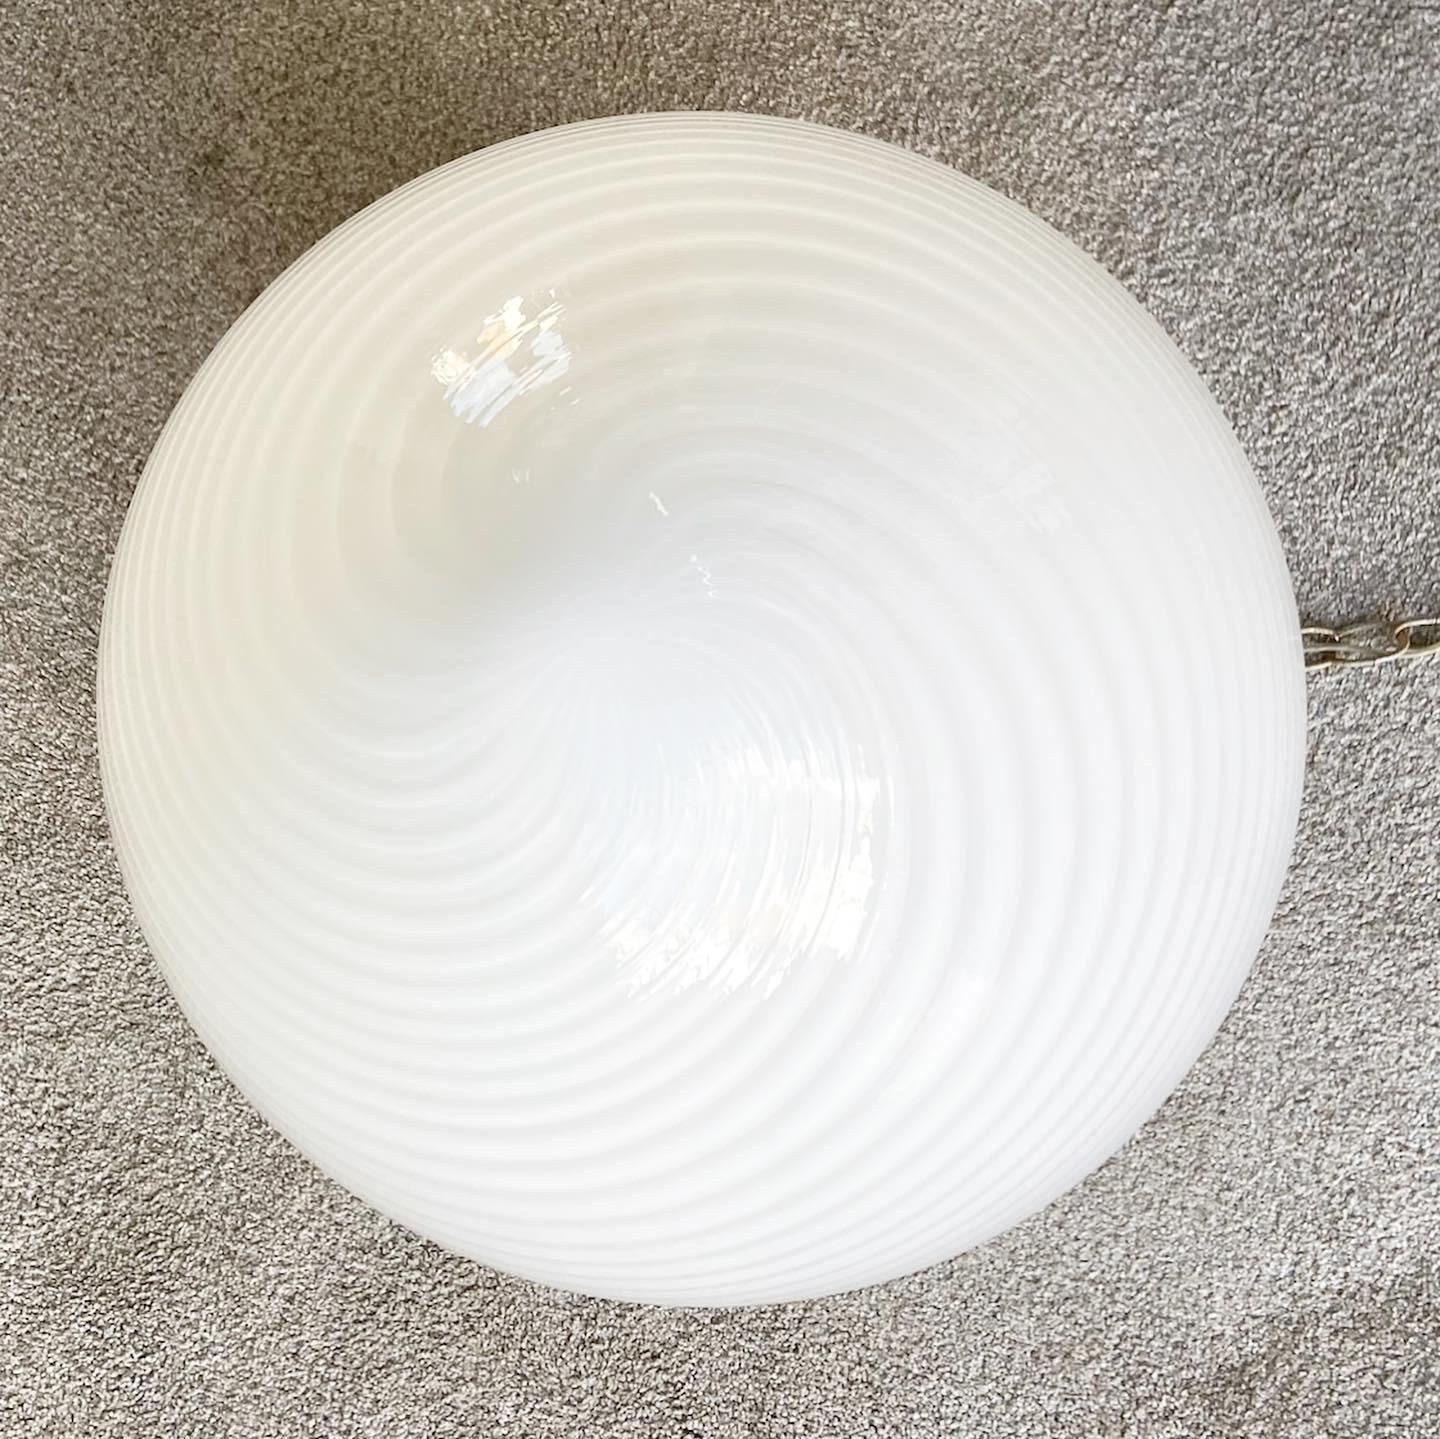 Outstanding vintage Murano glass hanging egg lamp. Features a fantastic swirl and let me tell you, this was one of those moments.